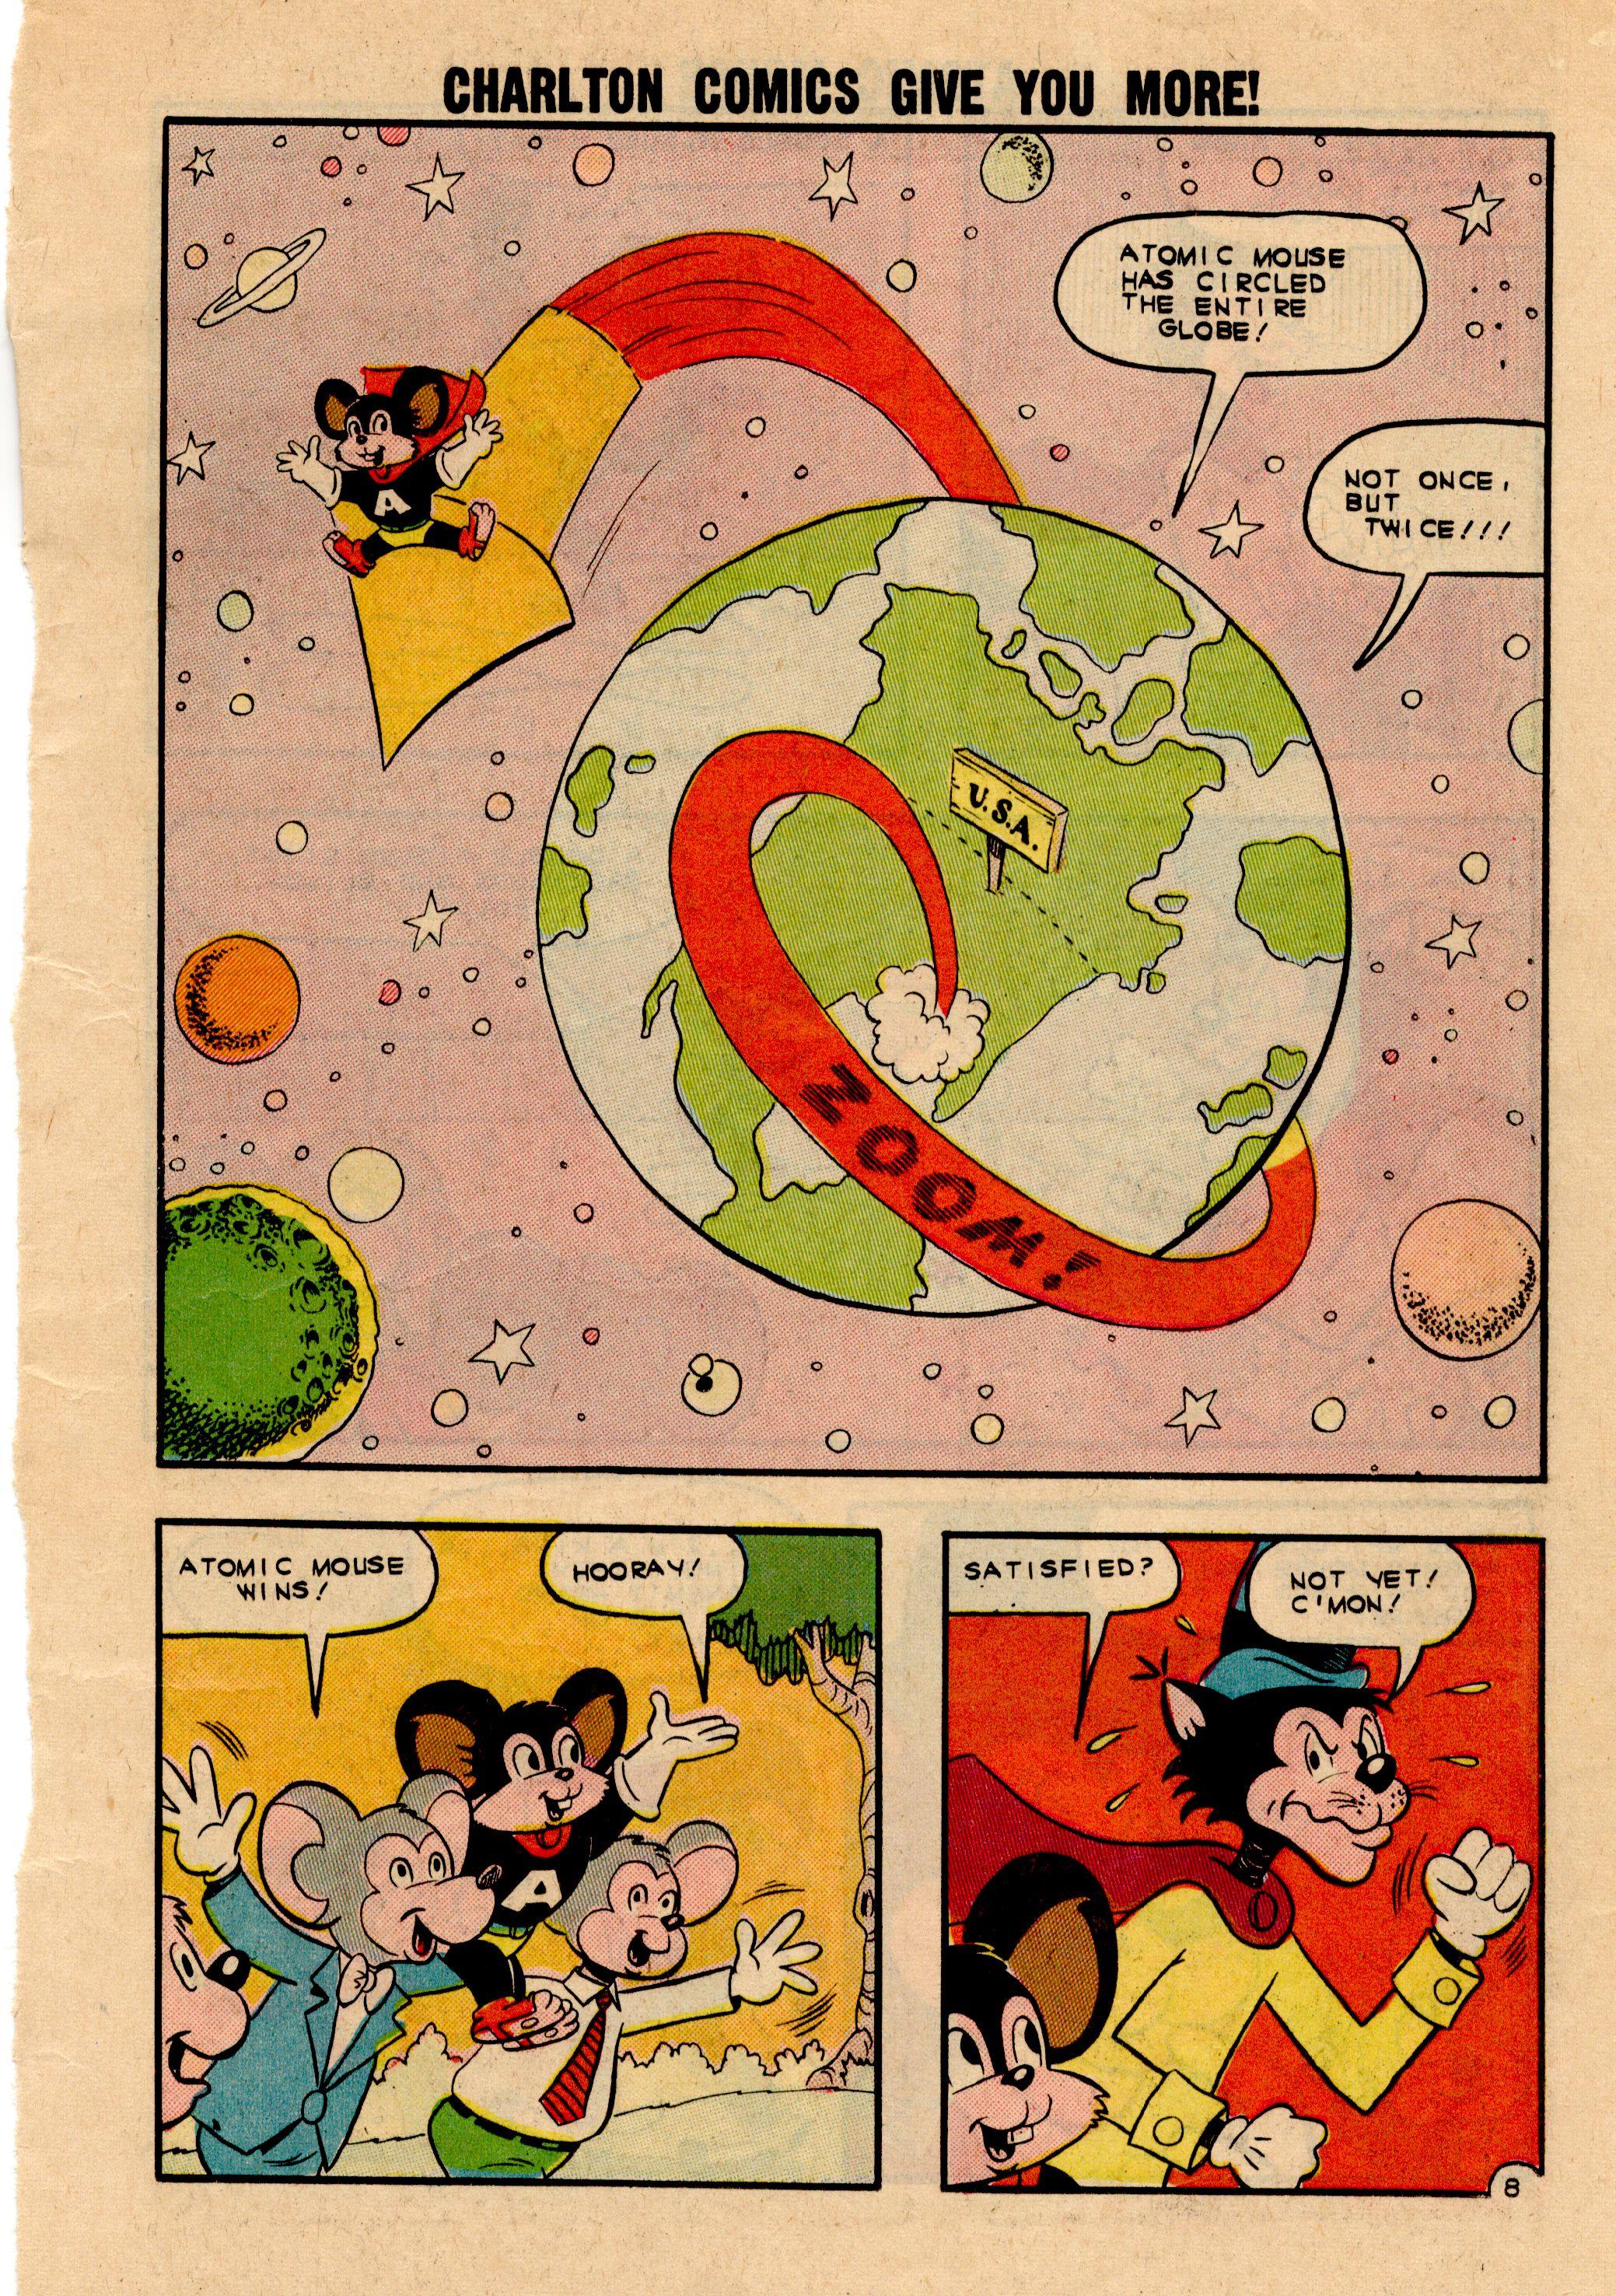 Read online Atomic Mouse comic -  Issue #49 - 11